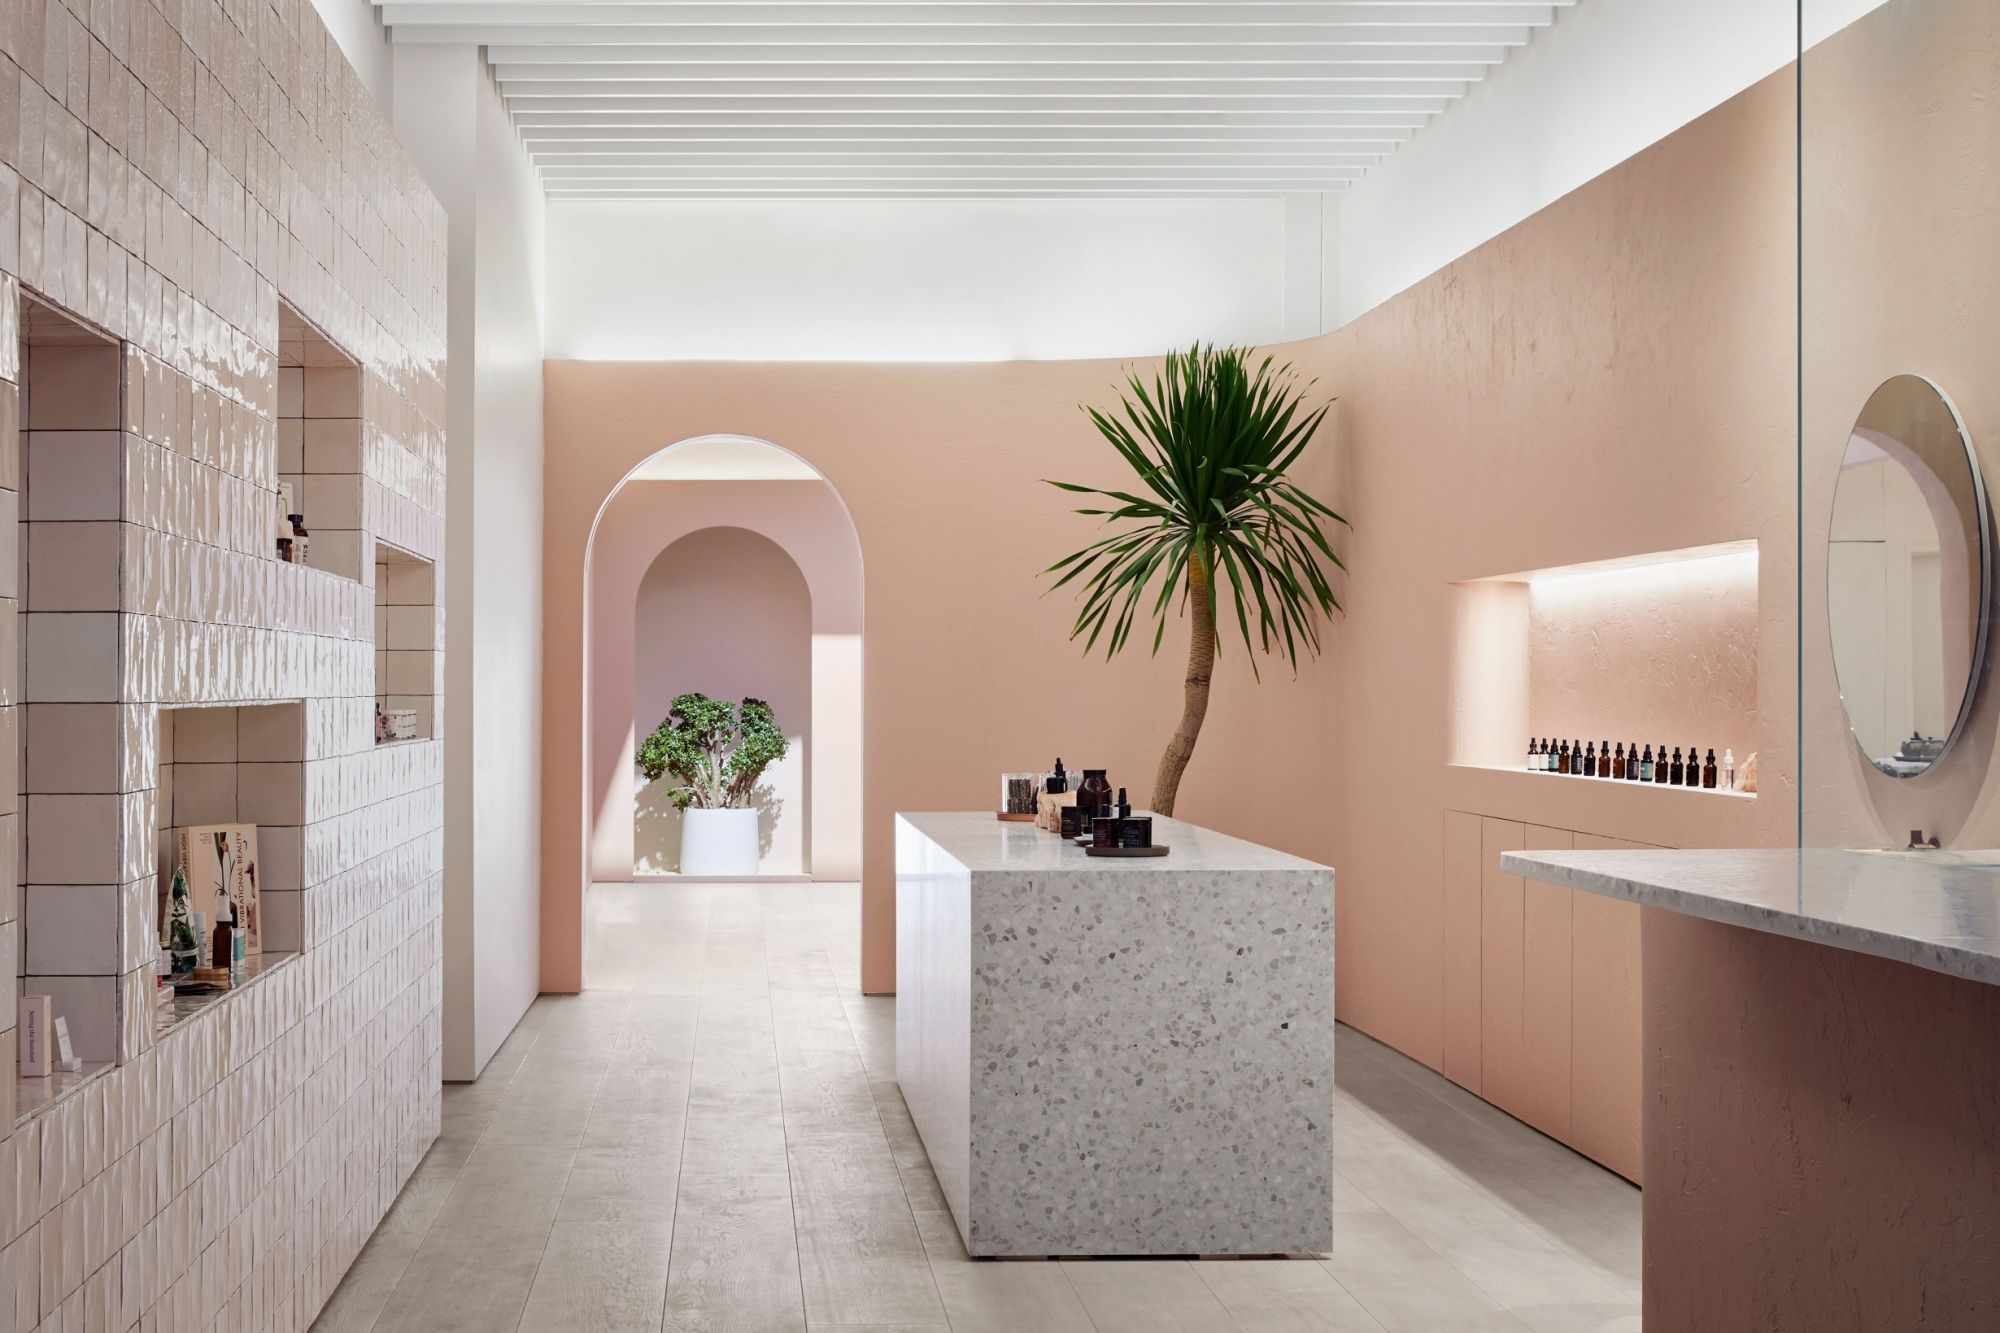 New York Spa Gives CBD the Upscale Treatment